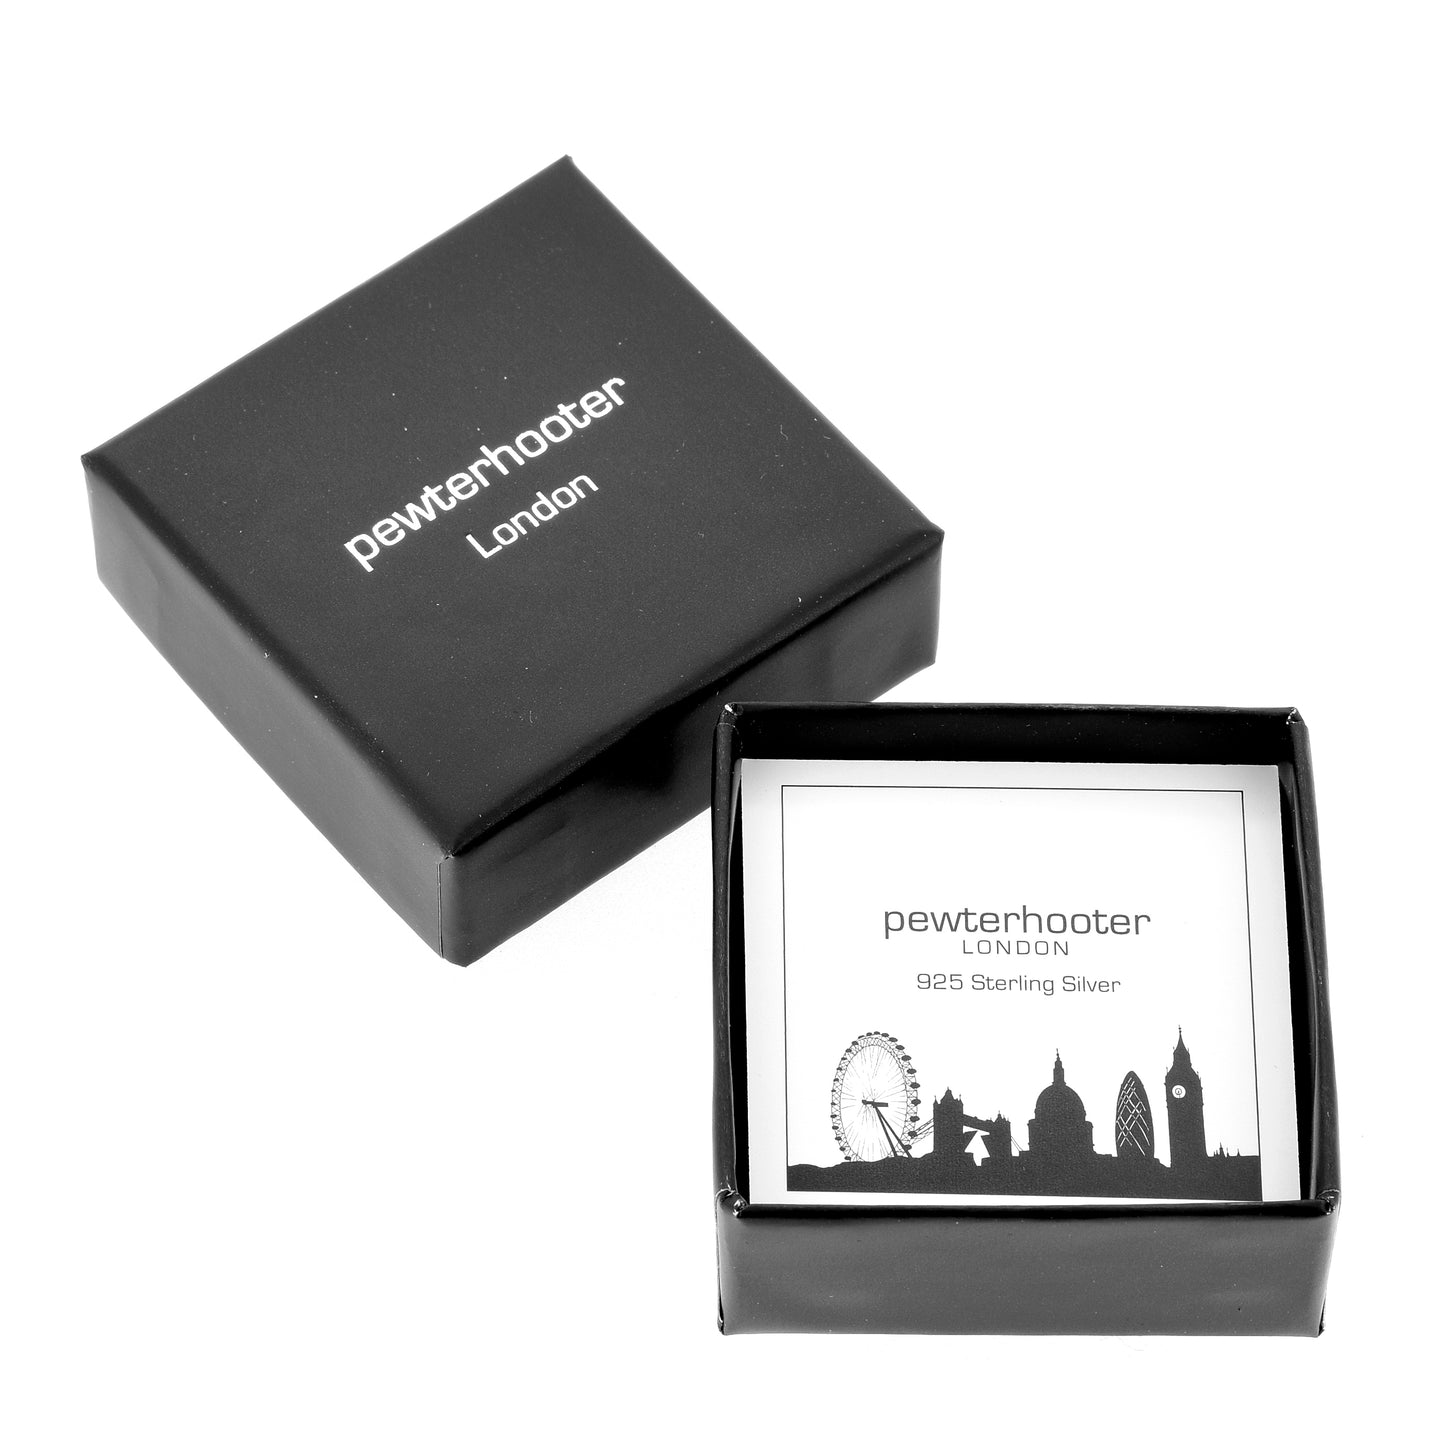 pewterhooter® Women's Classic Collection 925 Sterling silver earrings with brilliant Light Colorado Topaz crystals, packaged in a gift box for any occasion.